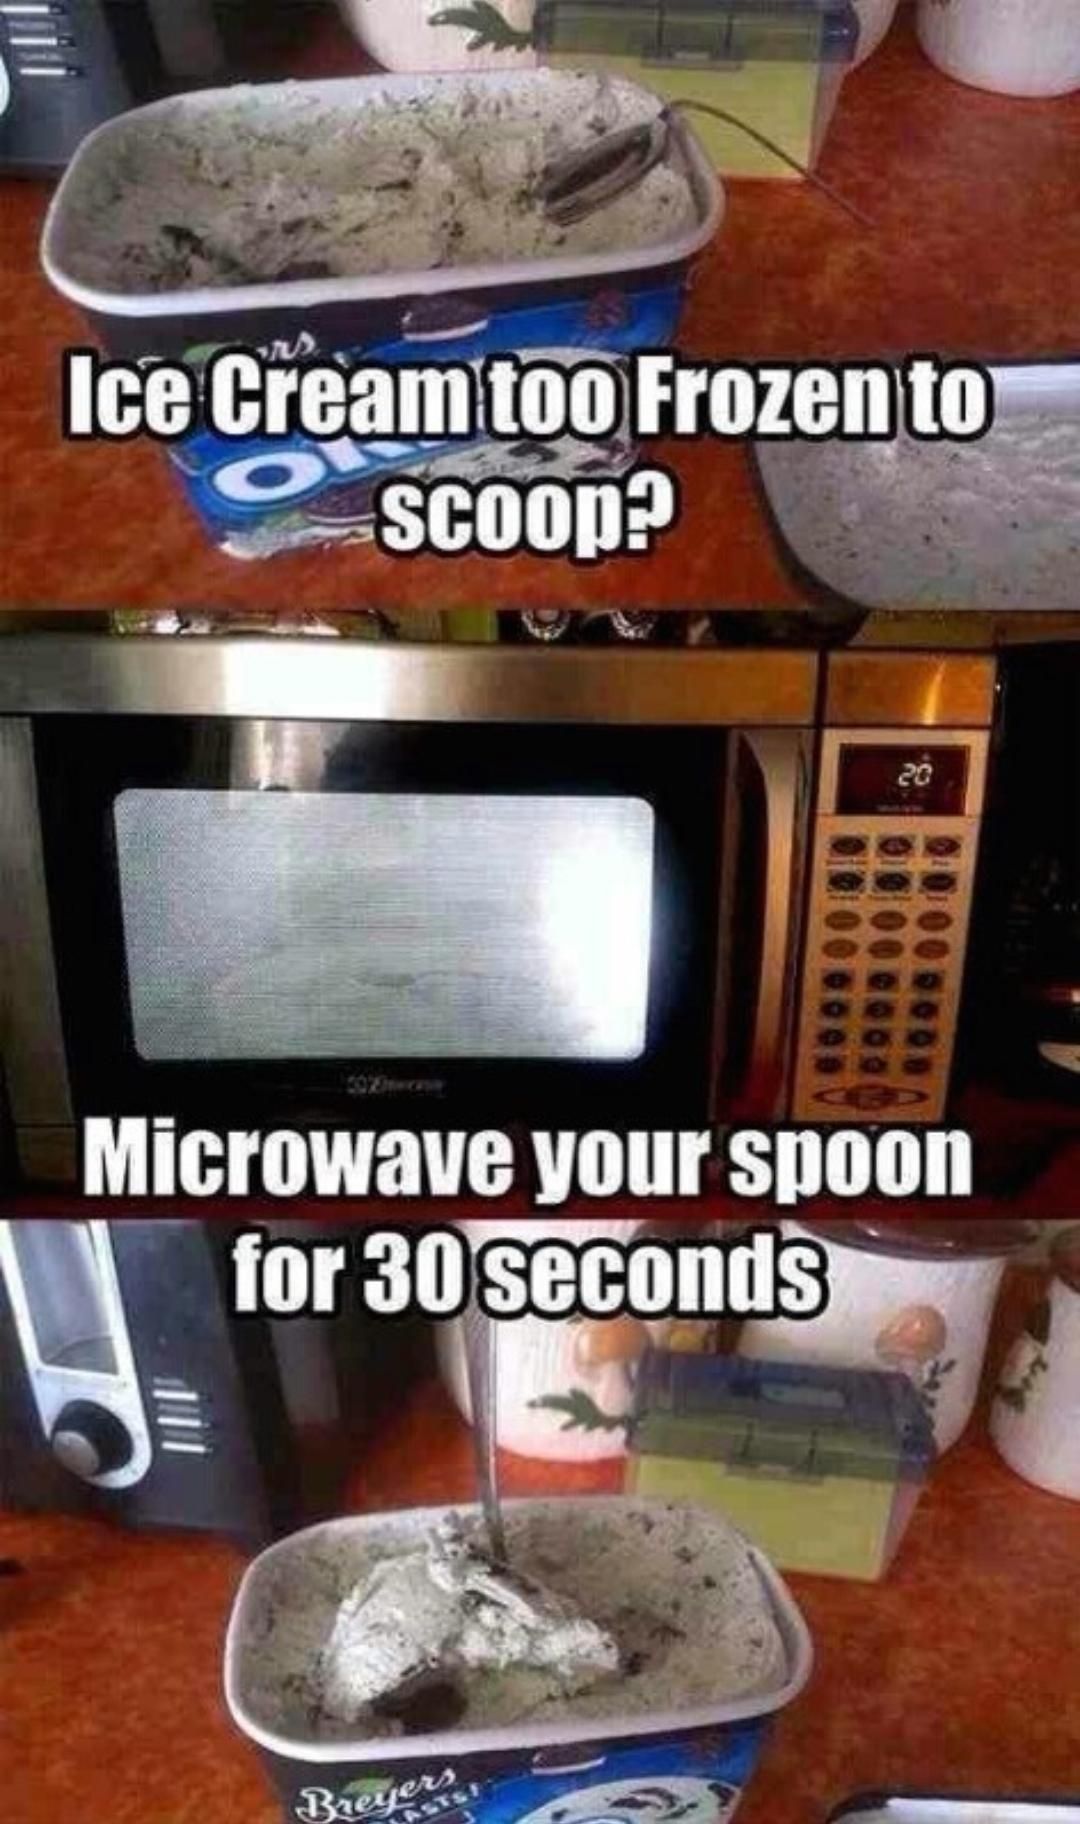 tried it, works pretty well, just wrap the spoon in aluminum foil to make sure it heats up the spoon evenly.